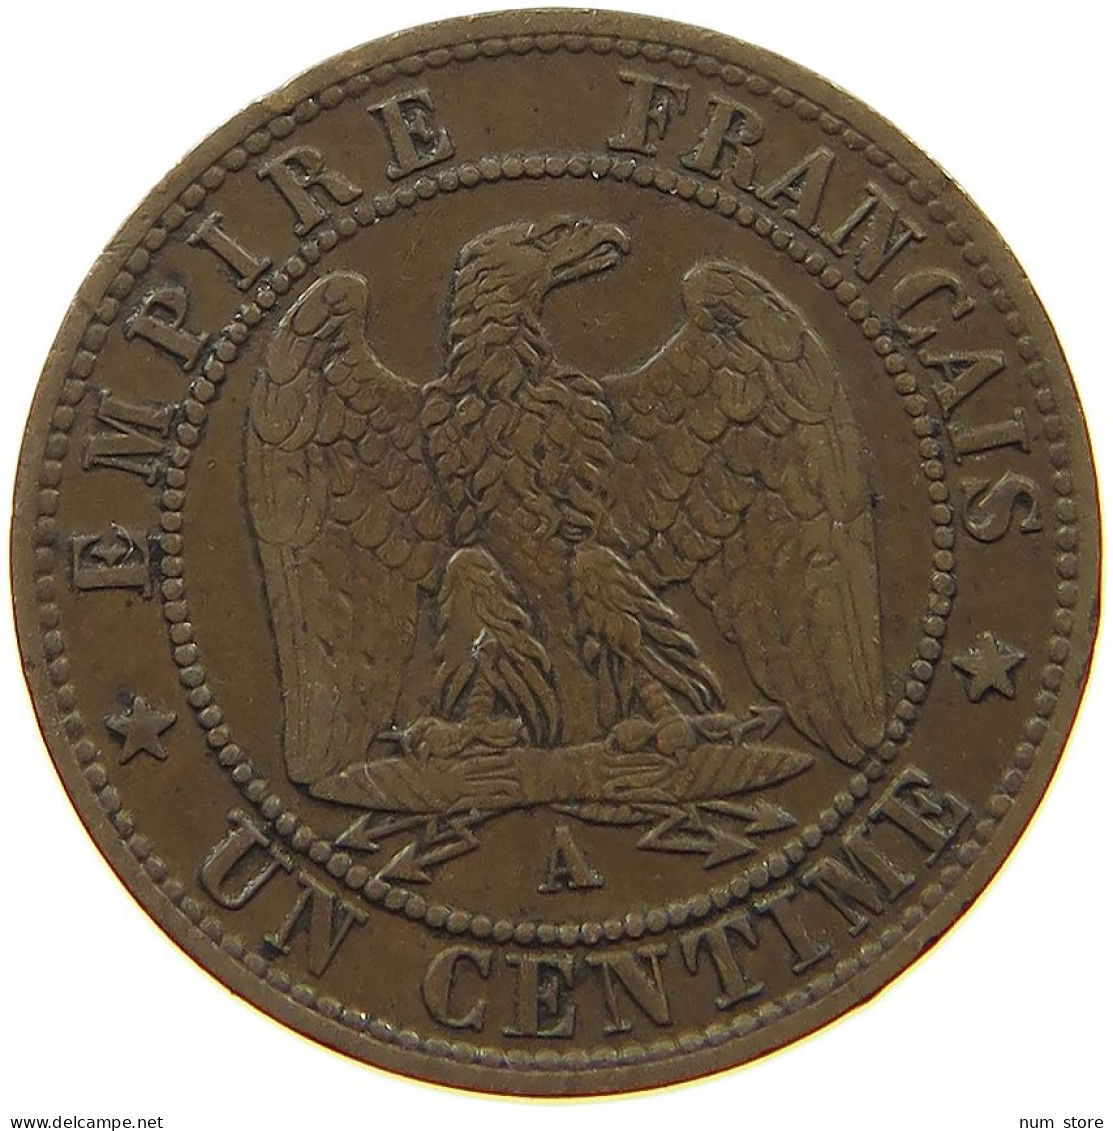 FRANCE CENTIME 1862 A Napoleon III. (1852-1870) #a015 0181 - 1 Centime